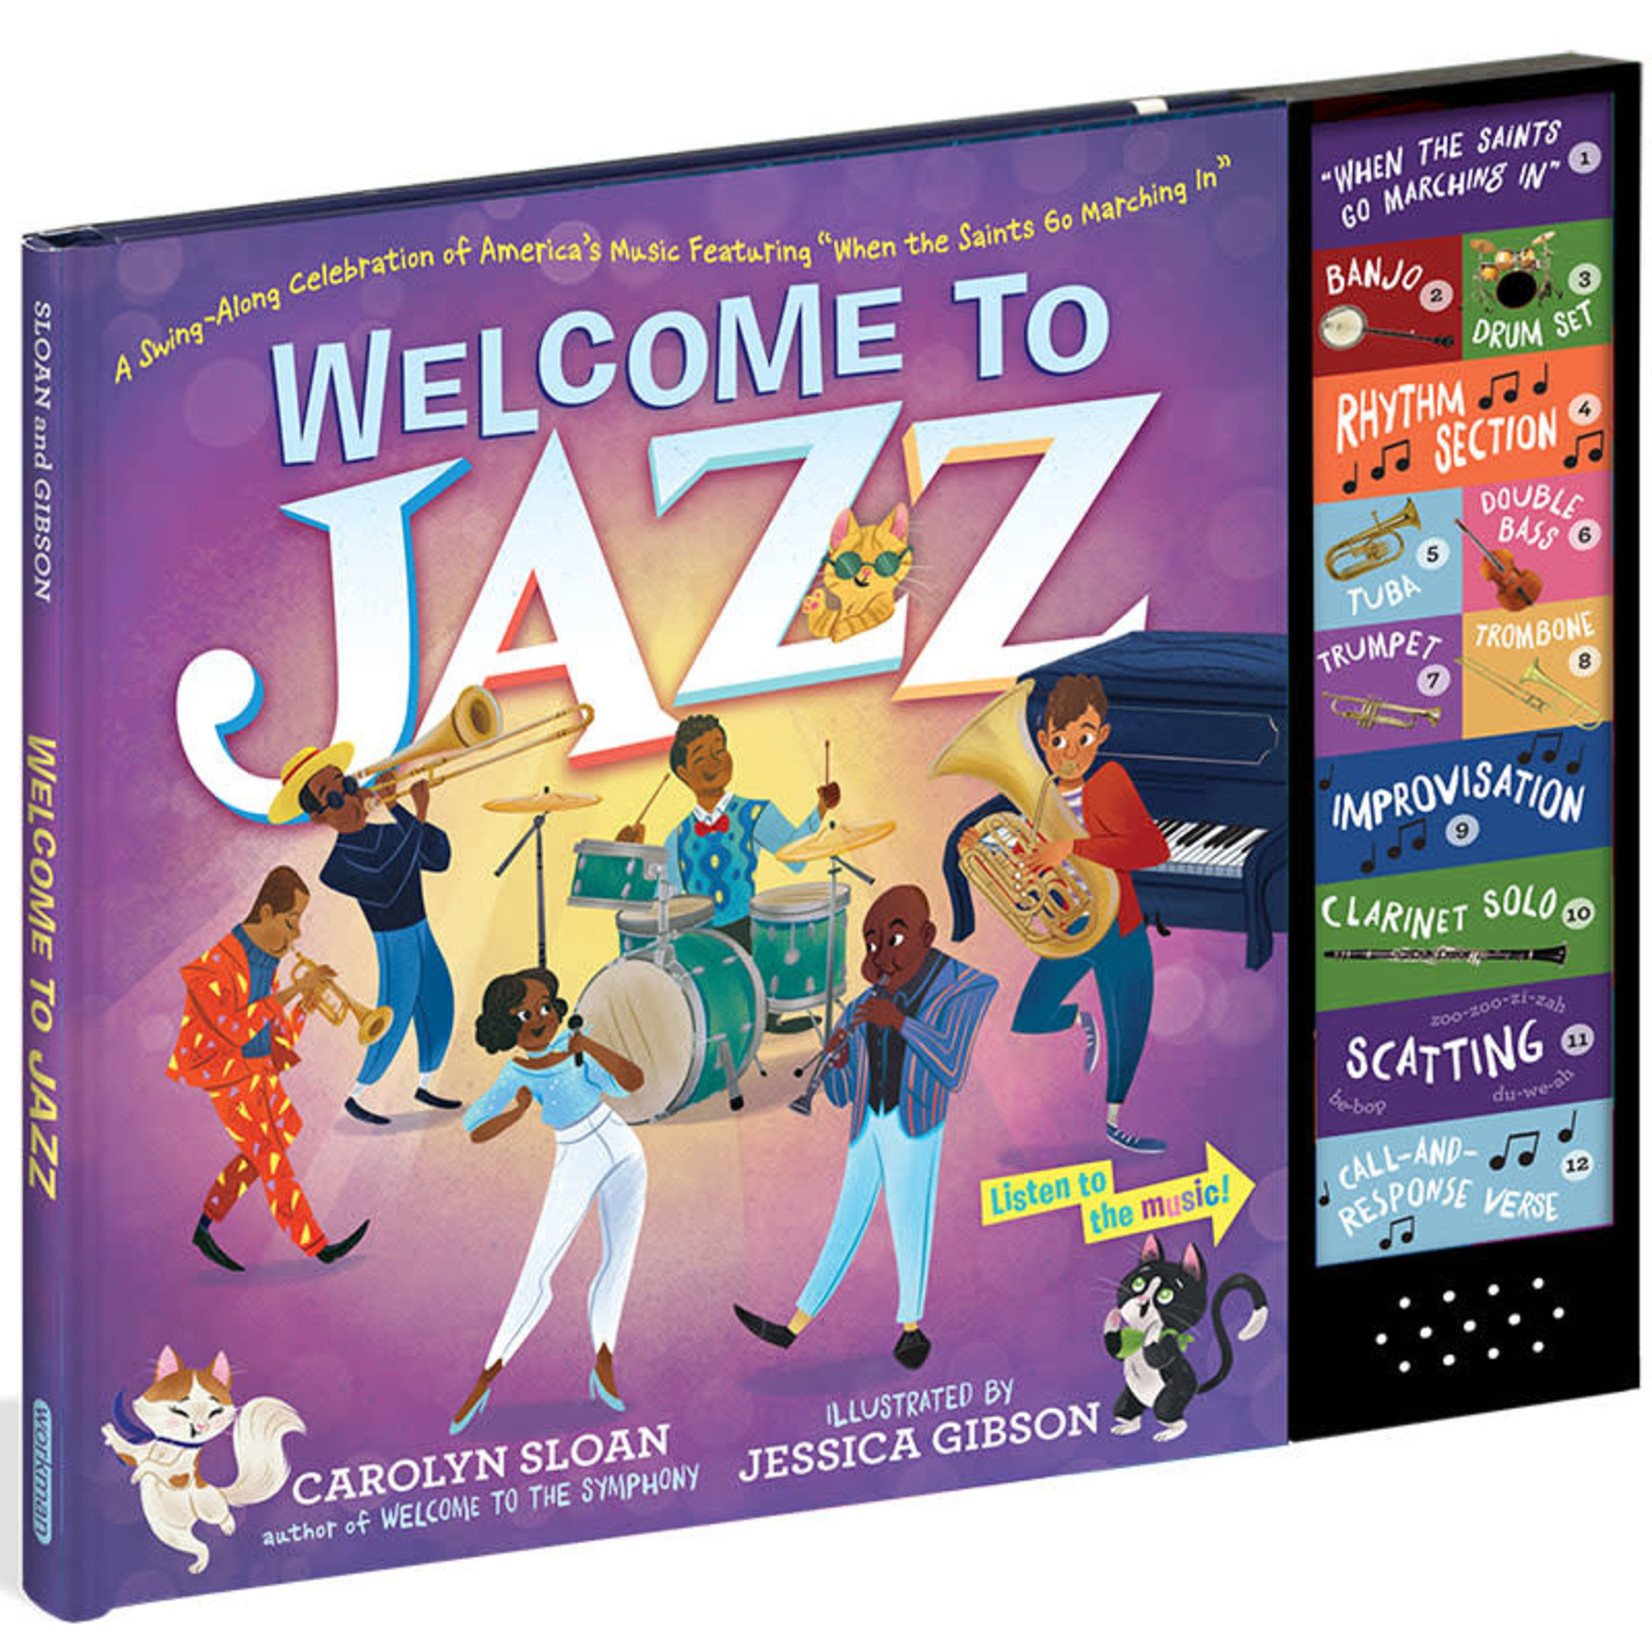 Kids Sloan "Welcome to Jazz" Book